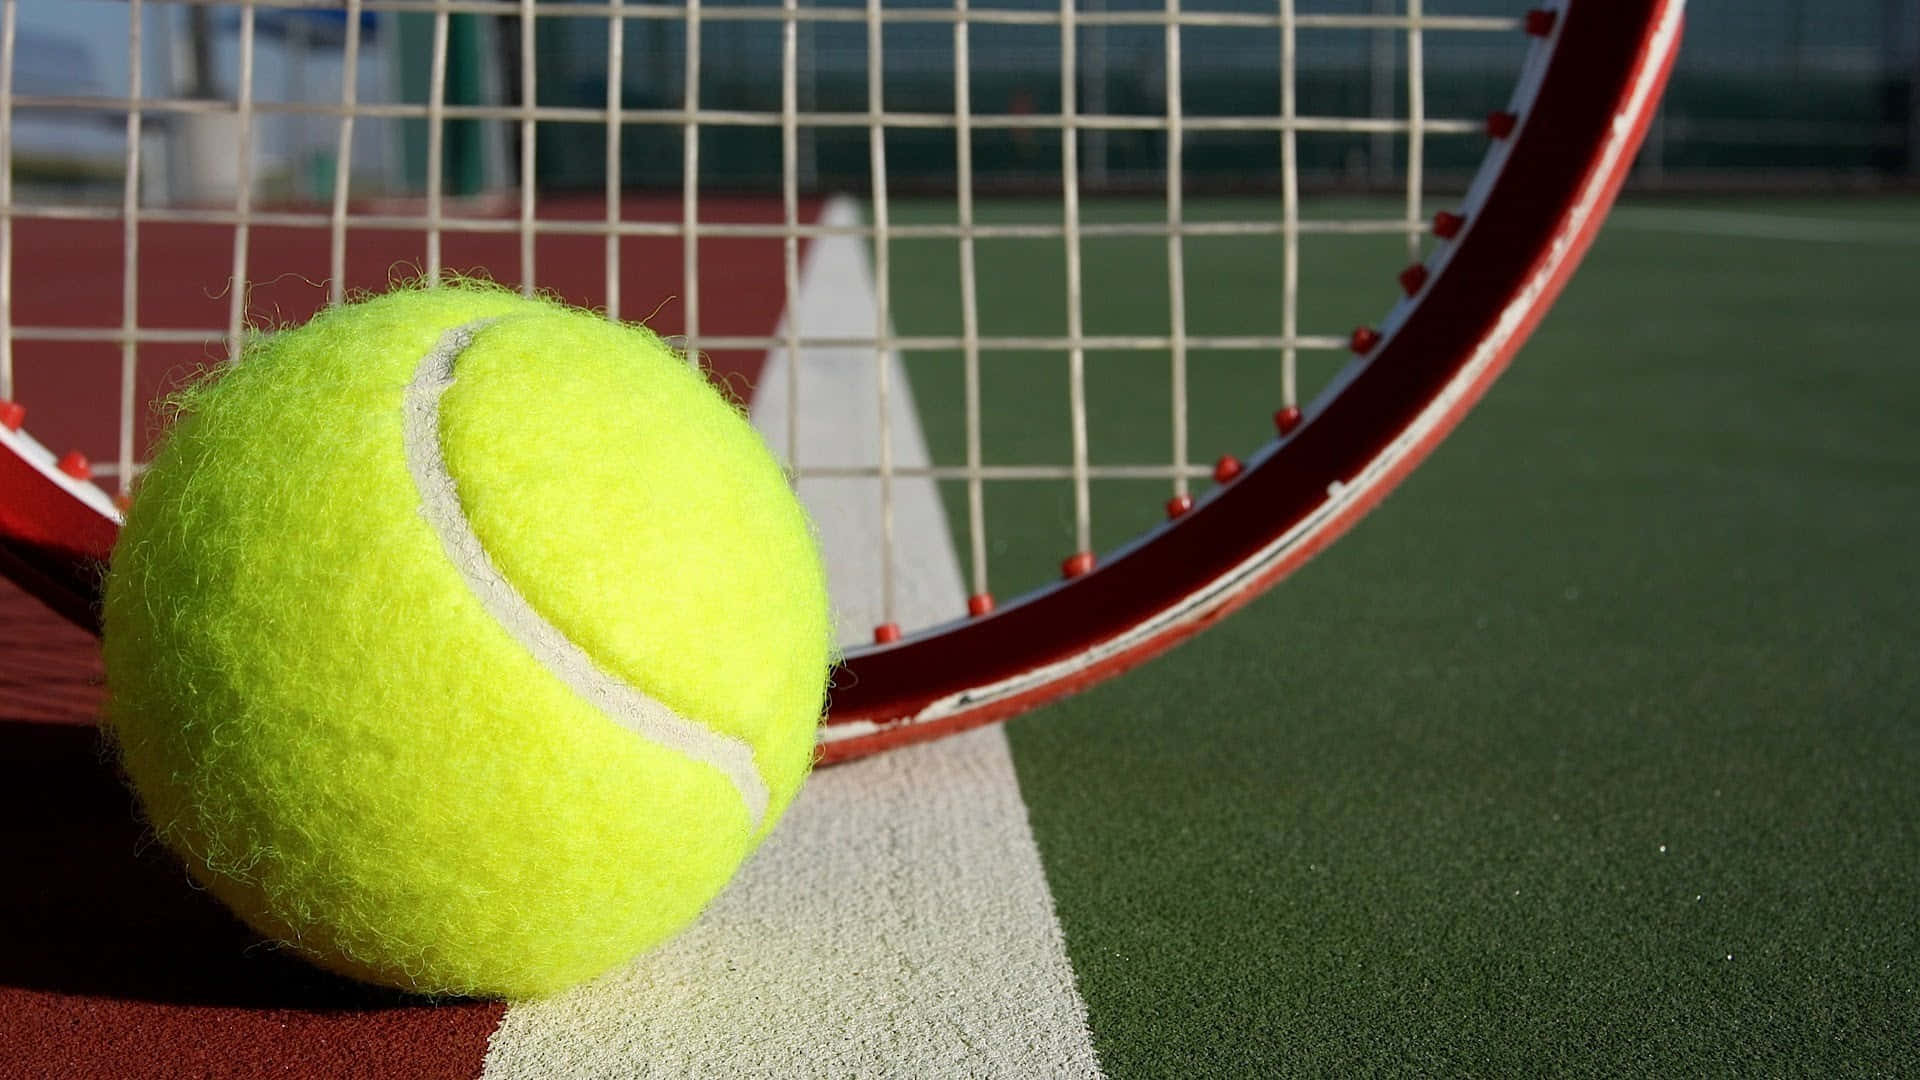 HD Tennis Ball Leaning On Racket Background